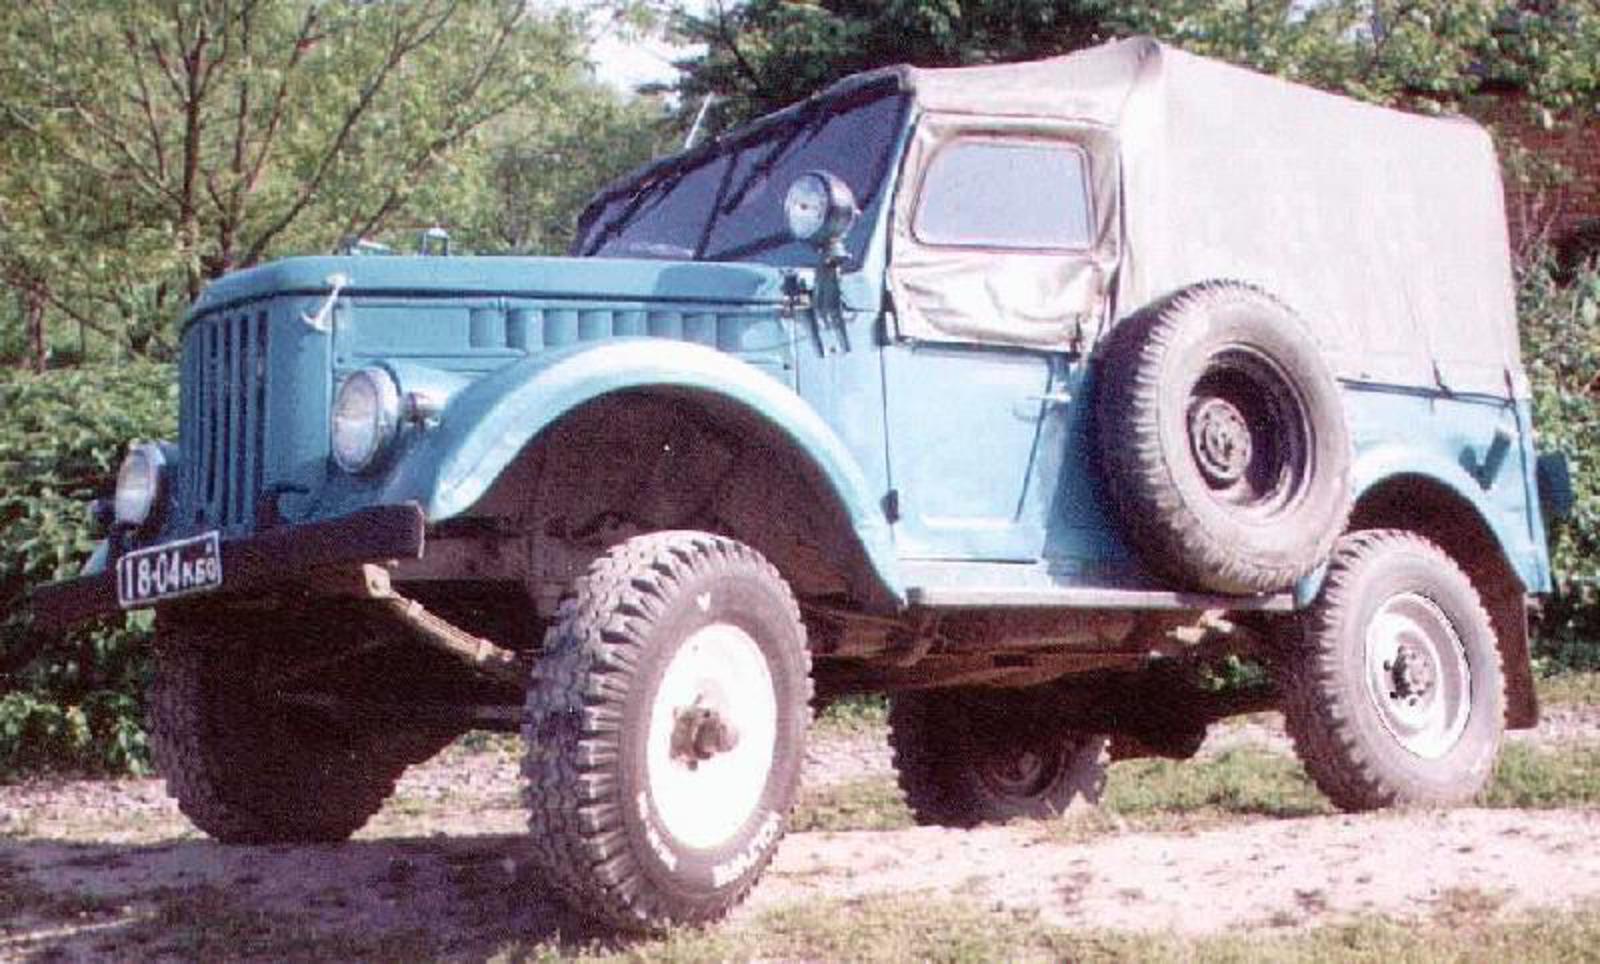 Overall production: 634256 of all GAZ-69 models